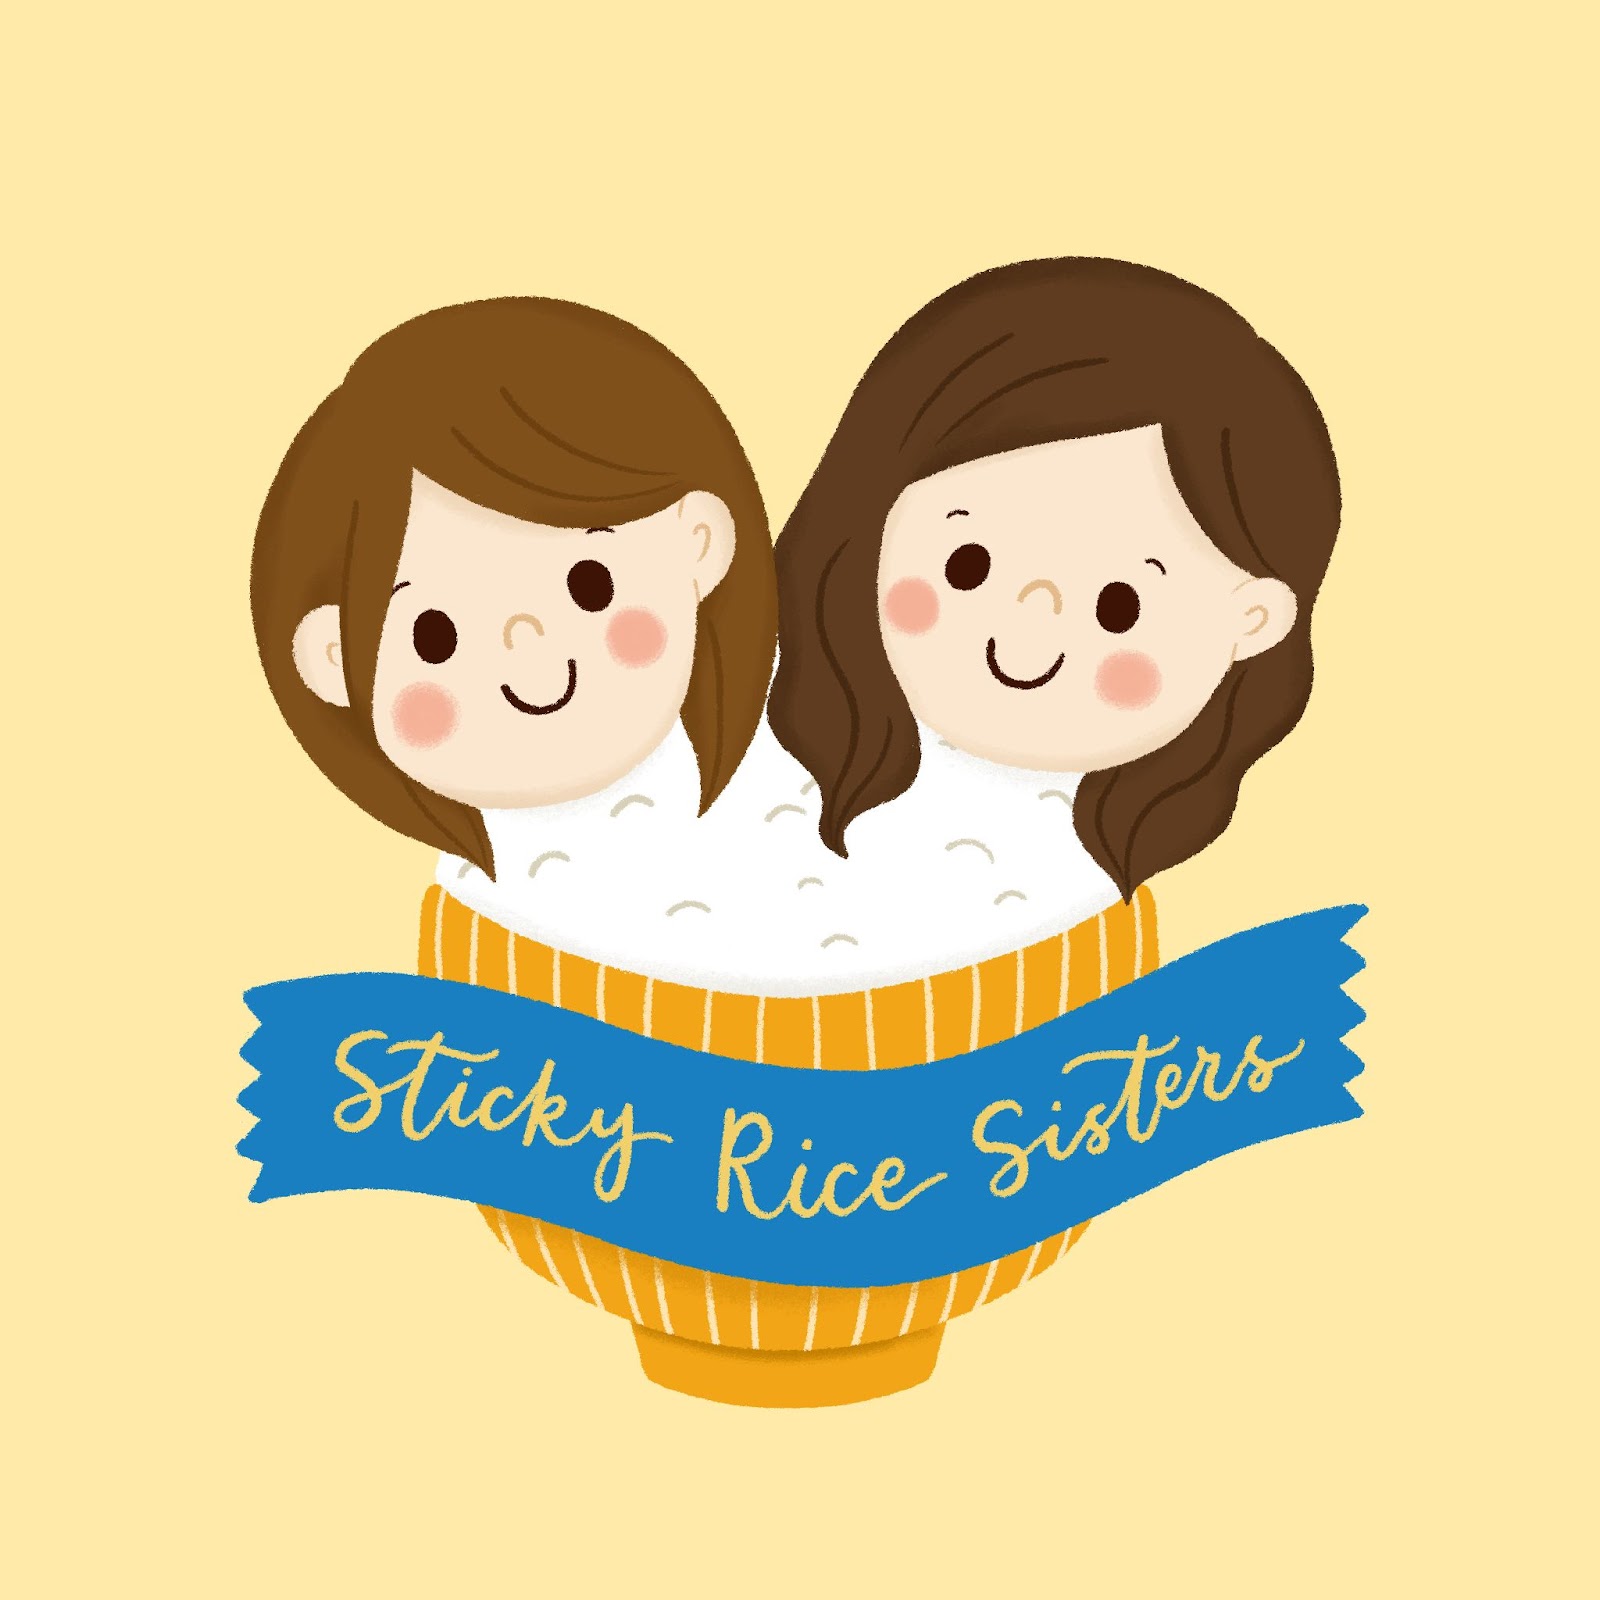 SmileABCs Sticky Rice Sisters–The image shows the Sticky Rice Sisters logo–a yellow background with a cartoon image of the two sisters’ heads in a bowl of sticky rice with a blue banner in front of the bowl that says “Sticky Rice Sisters”. 